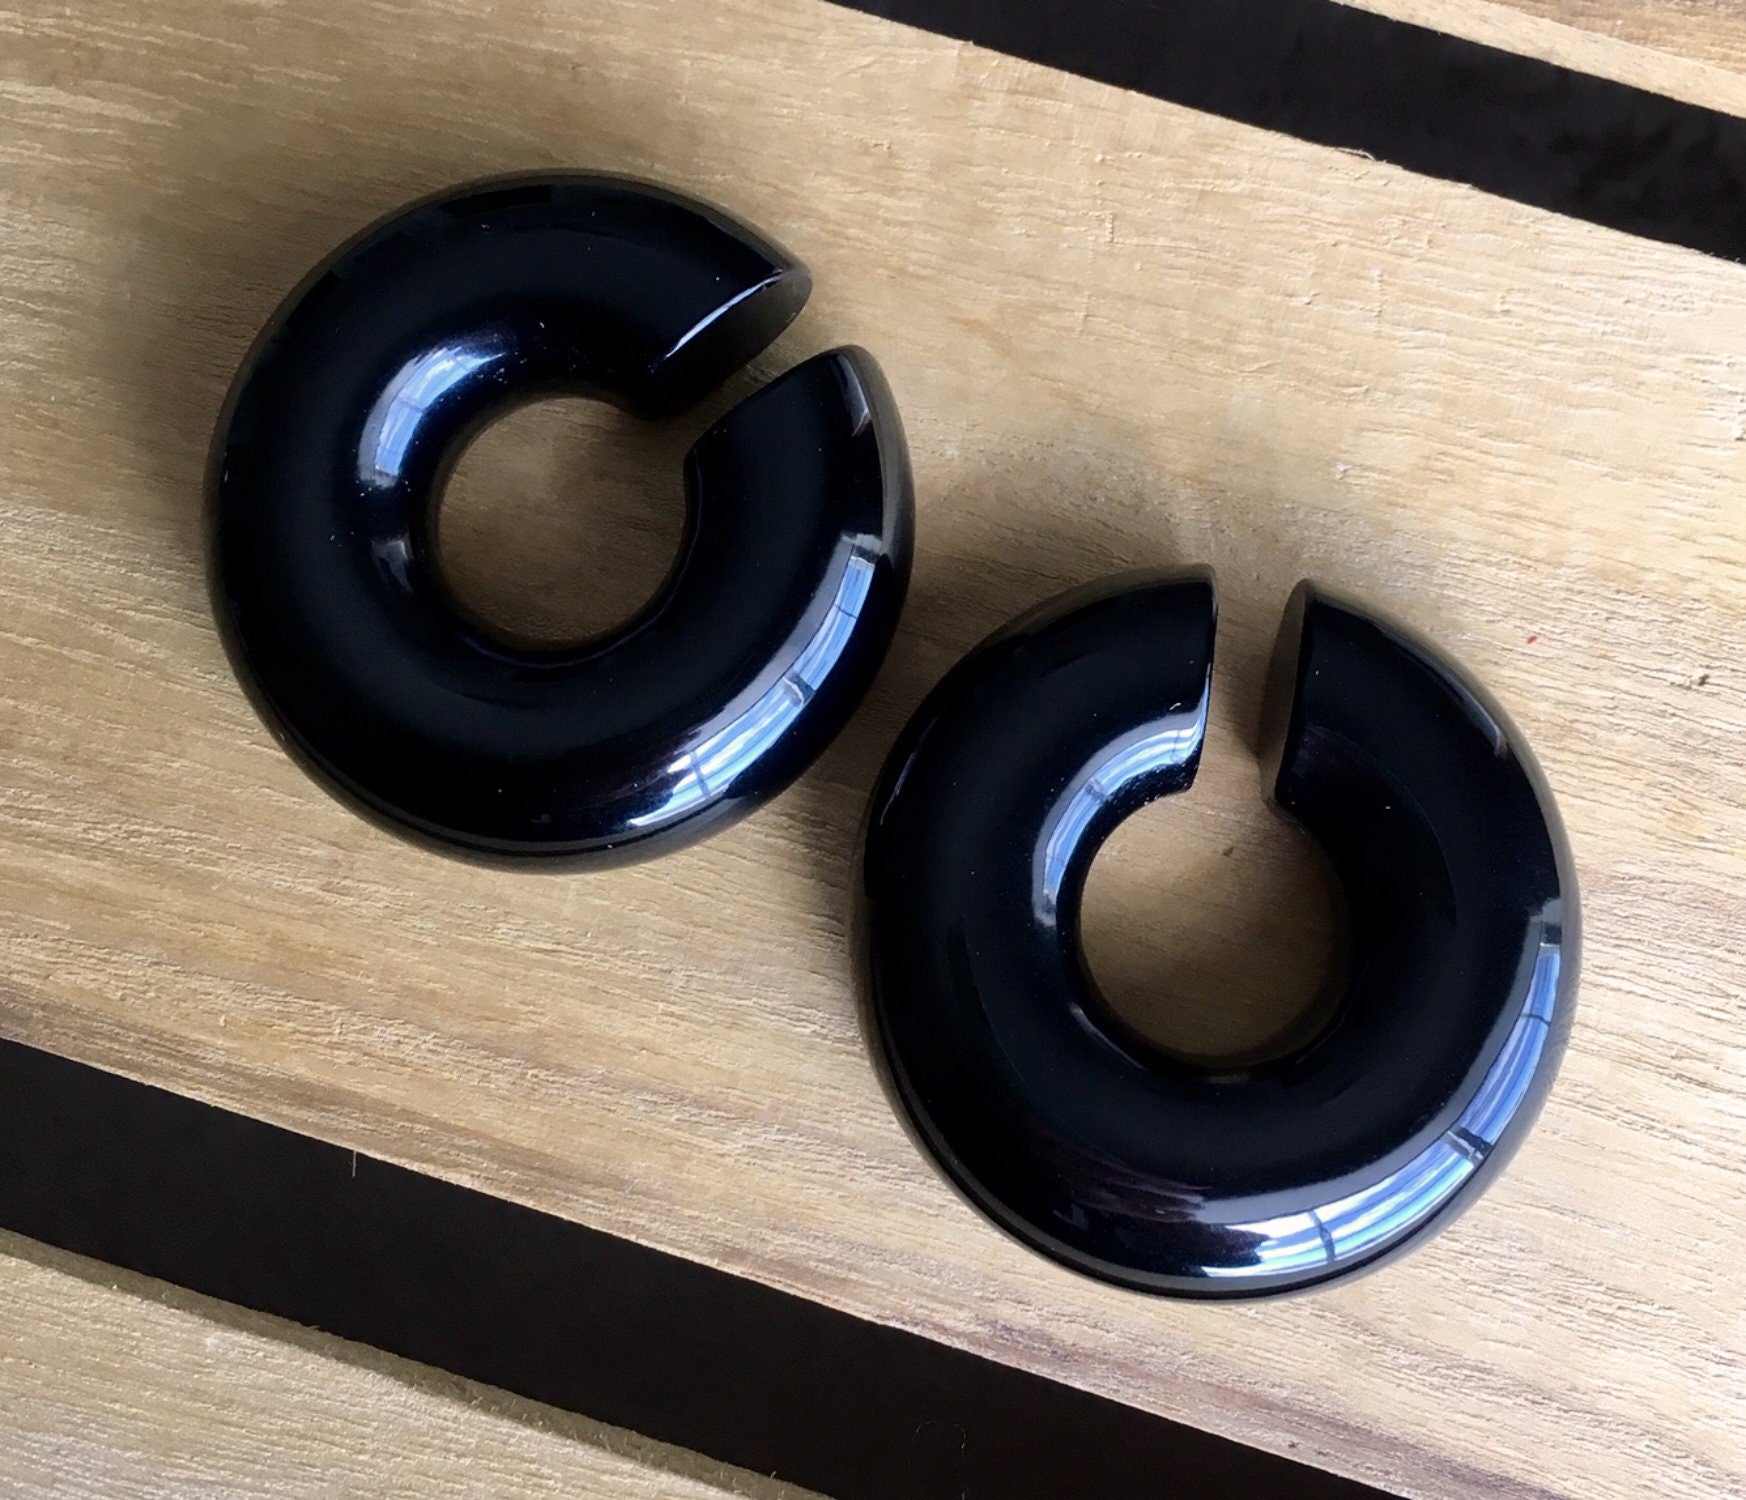 PAIR of Unique Organic Black Onyx Stone Hoops Ear Weight Hanging Plugs - Gauges 4g (5mm) up to 5/8" (16mm) available!